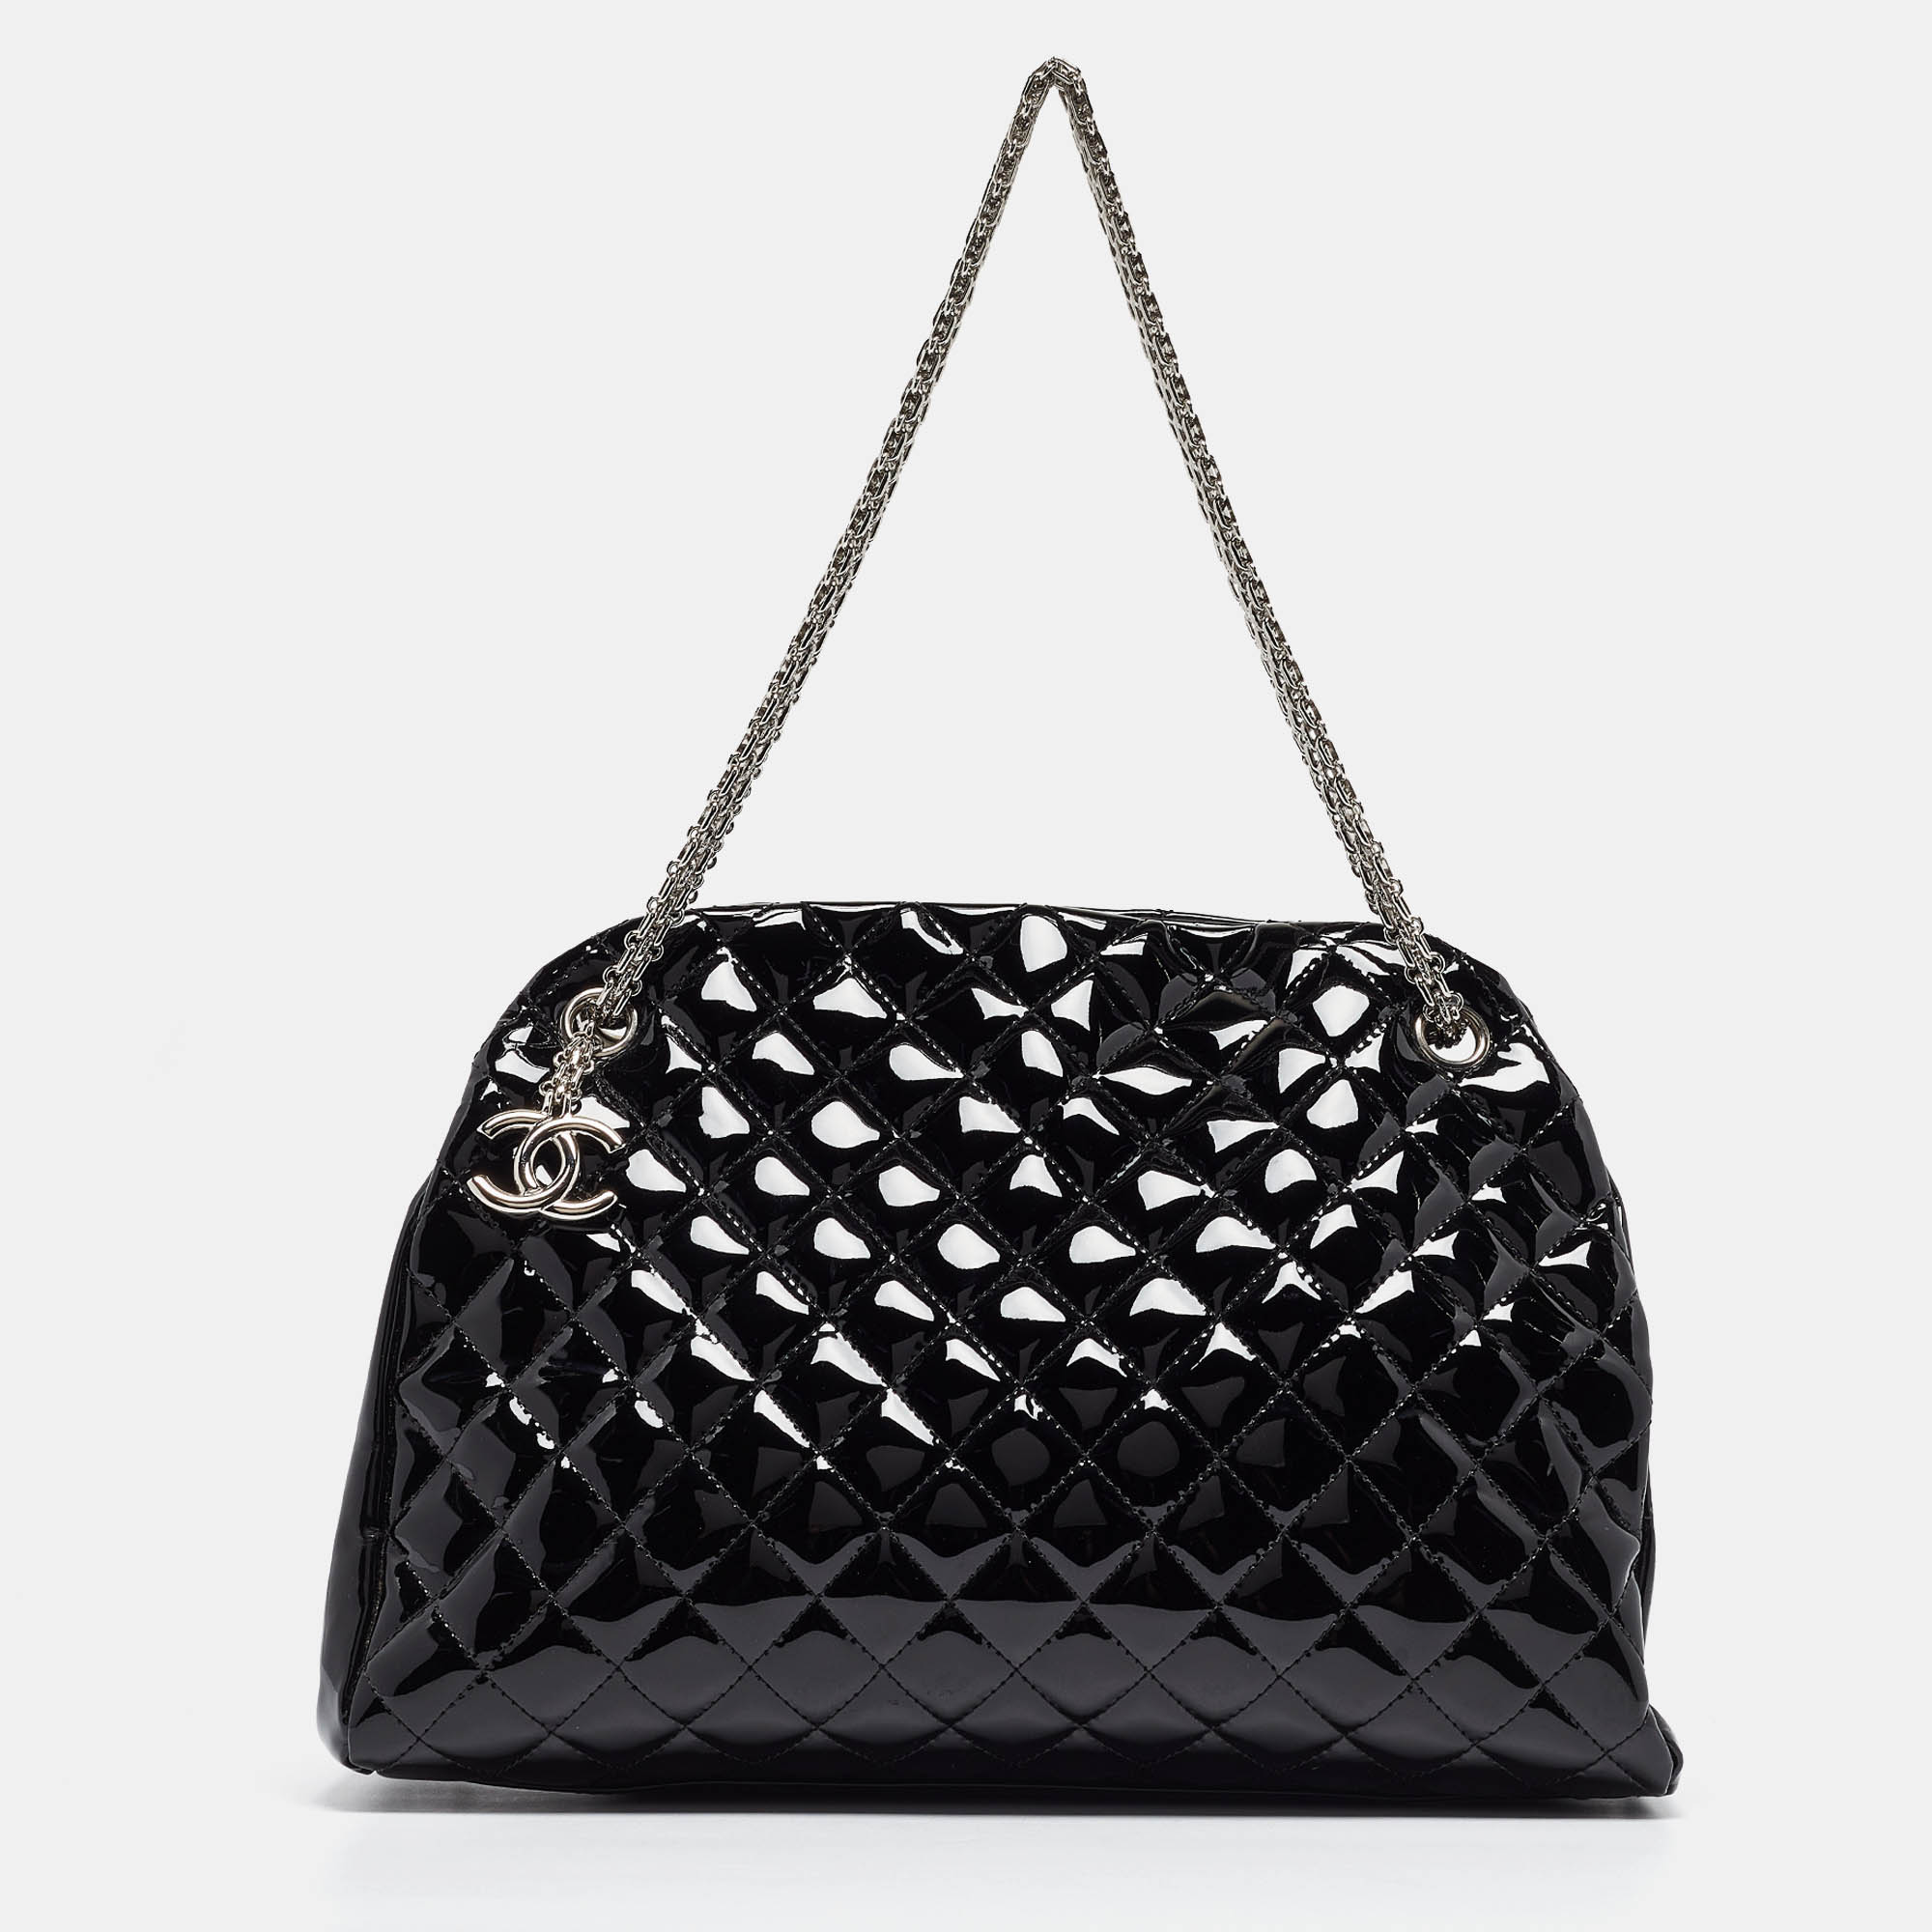 Chanel black quilted patent leather large just mademoiselle bowler bag